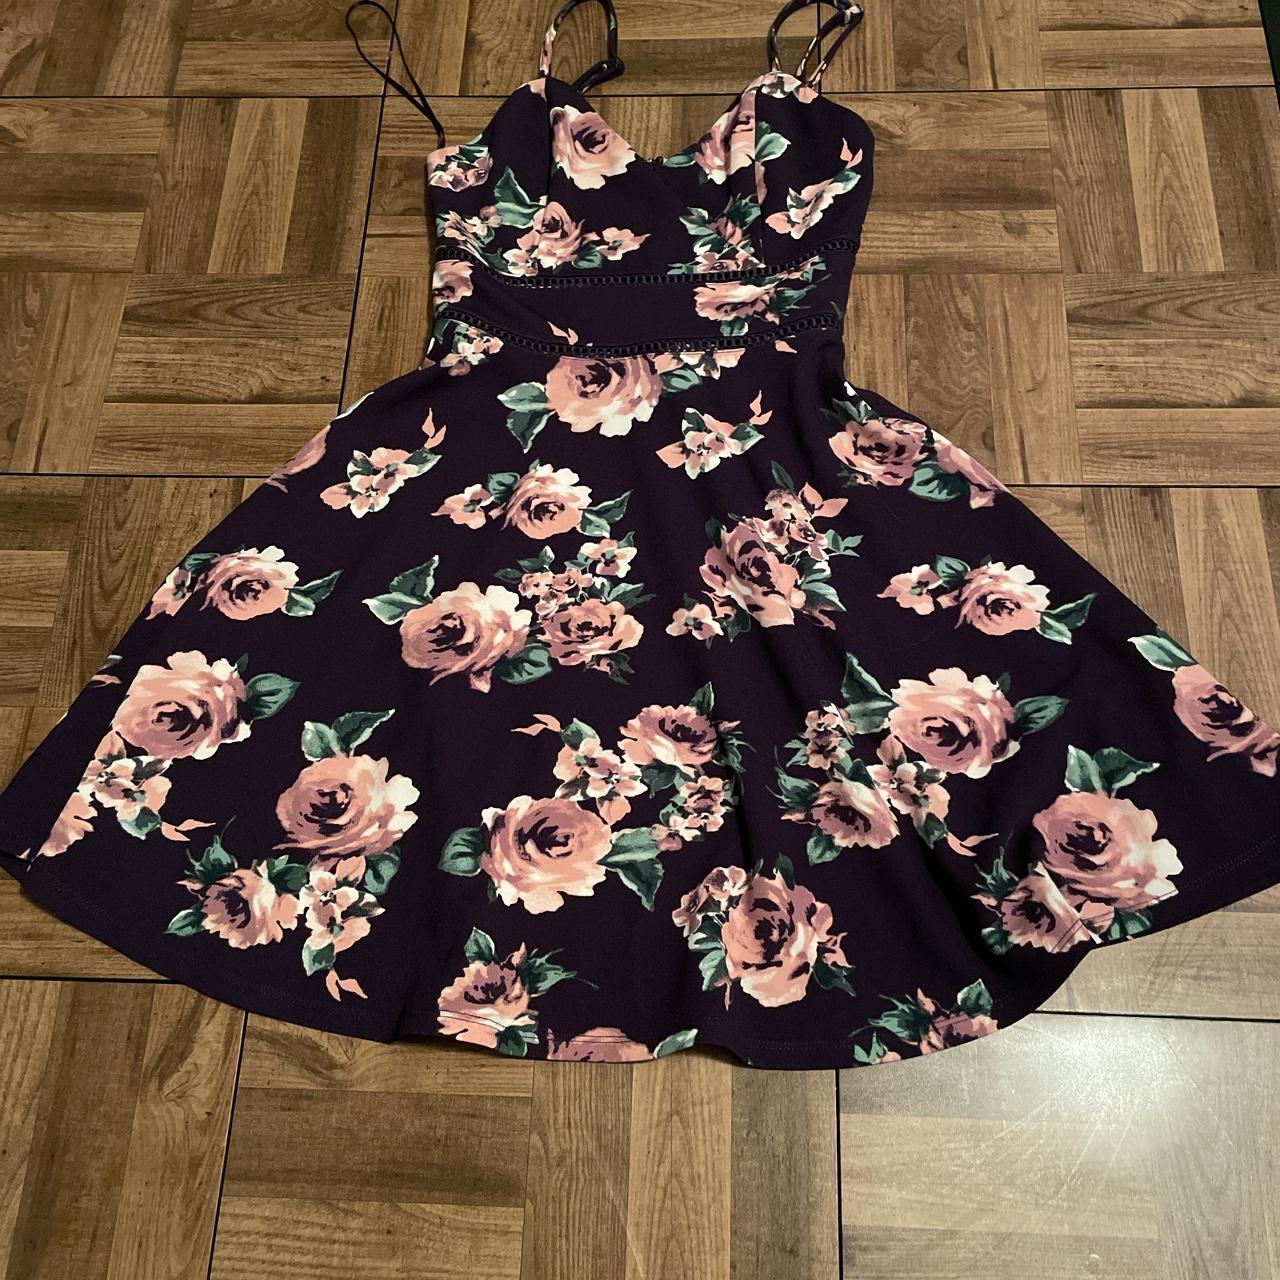 Product Image 1 - Purple mini dress with flowers
Has